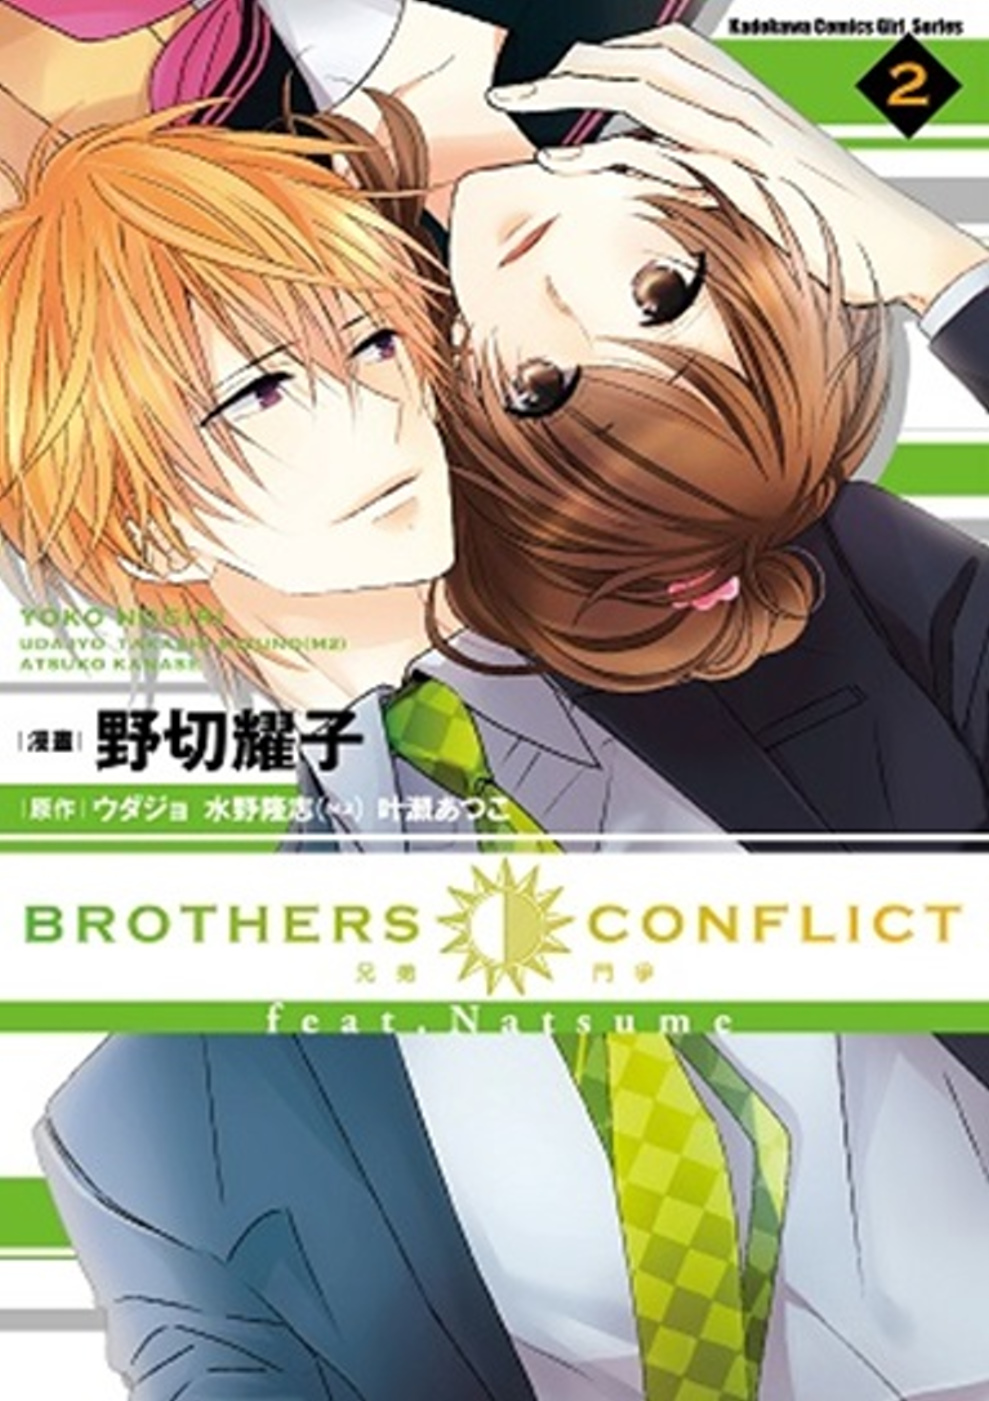 BROTHERS CONFLICT feat.Natsume 02（完）